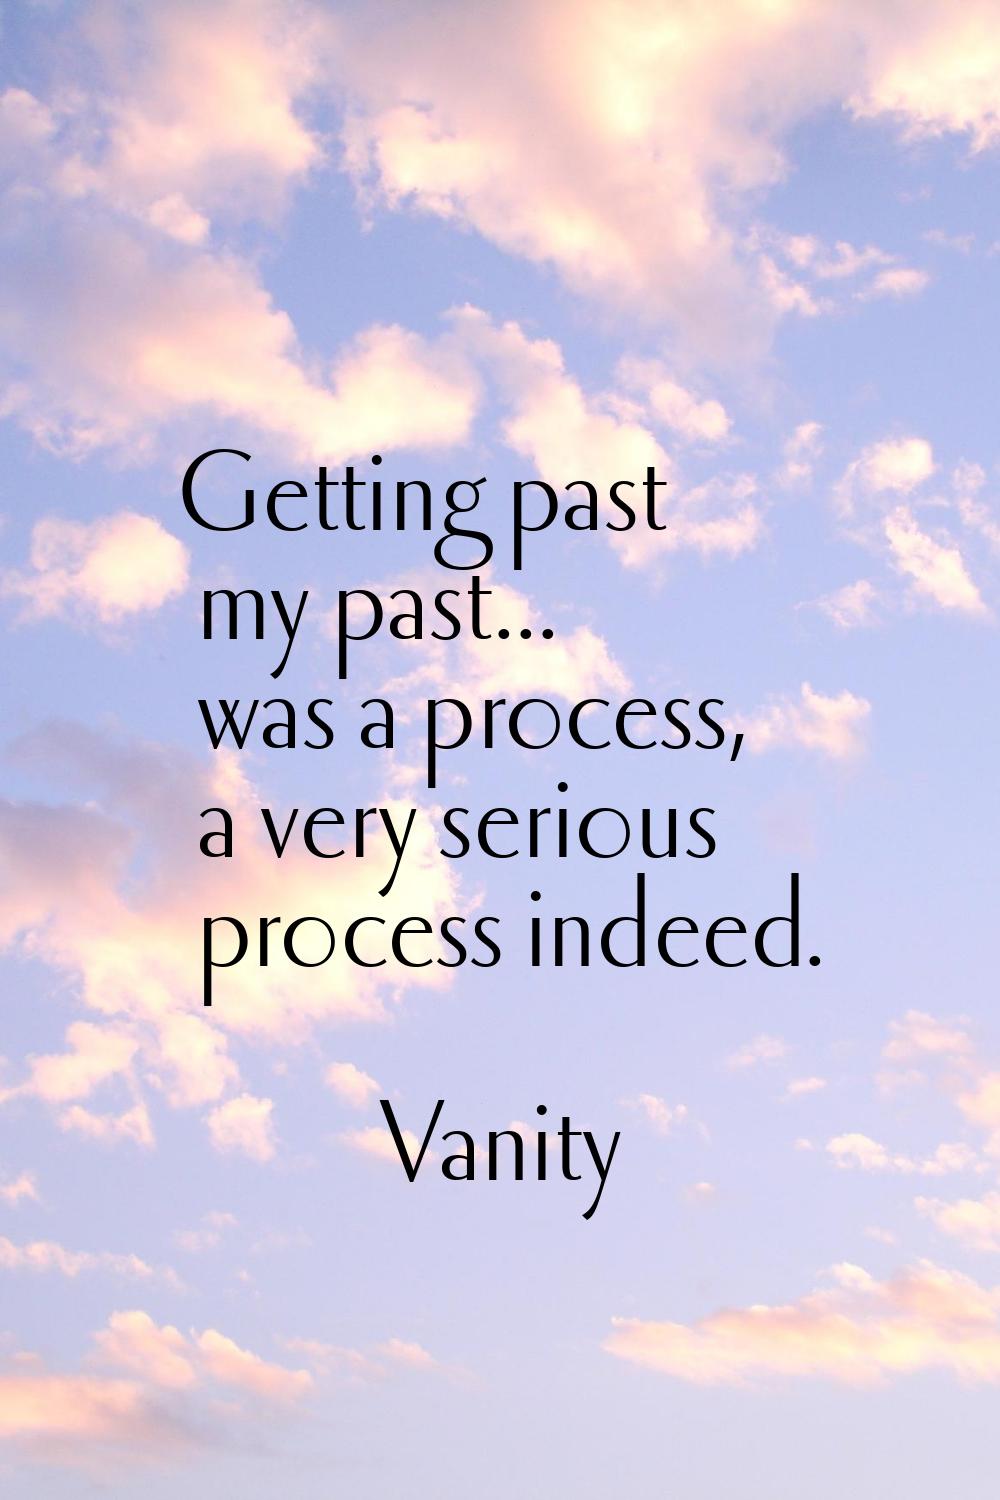 Getting past my past... was a process, a very serious process indeed.